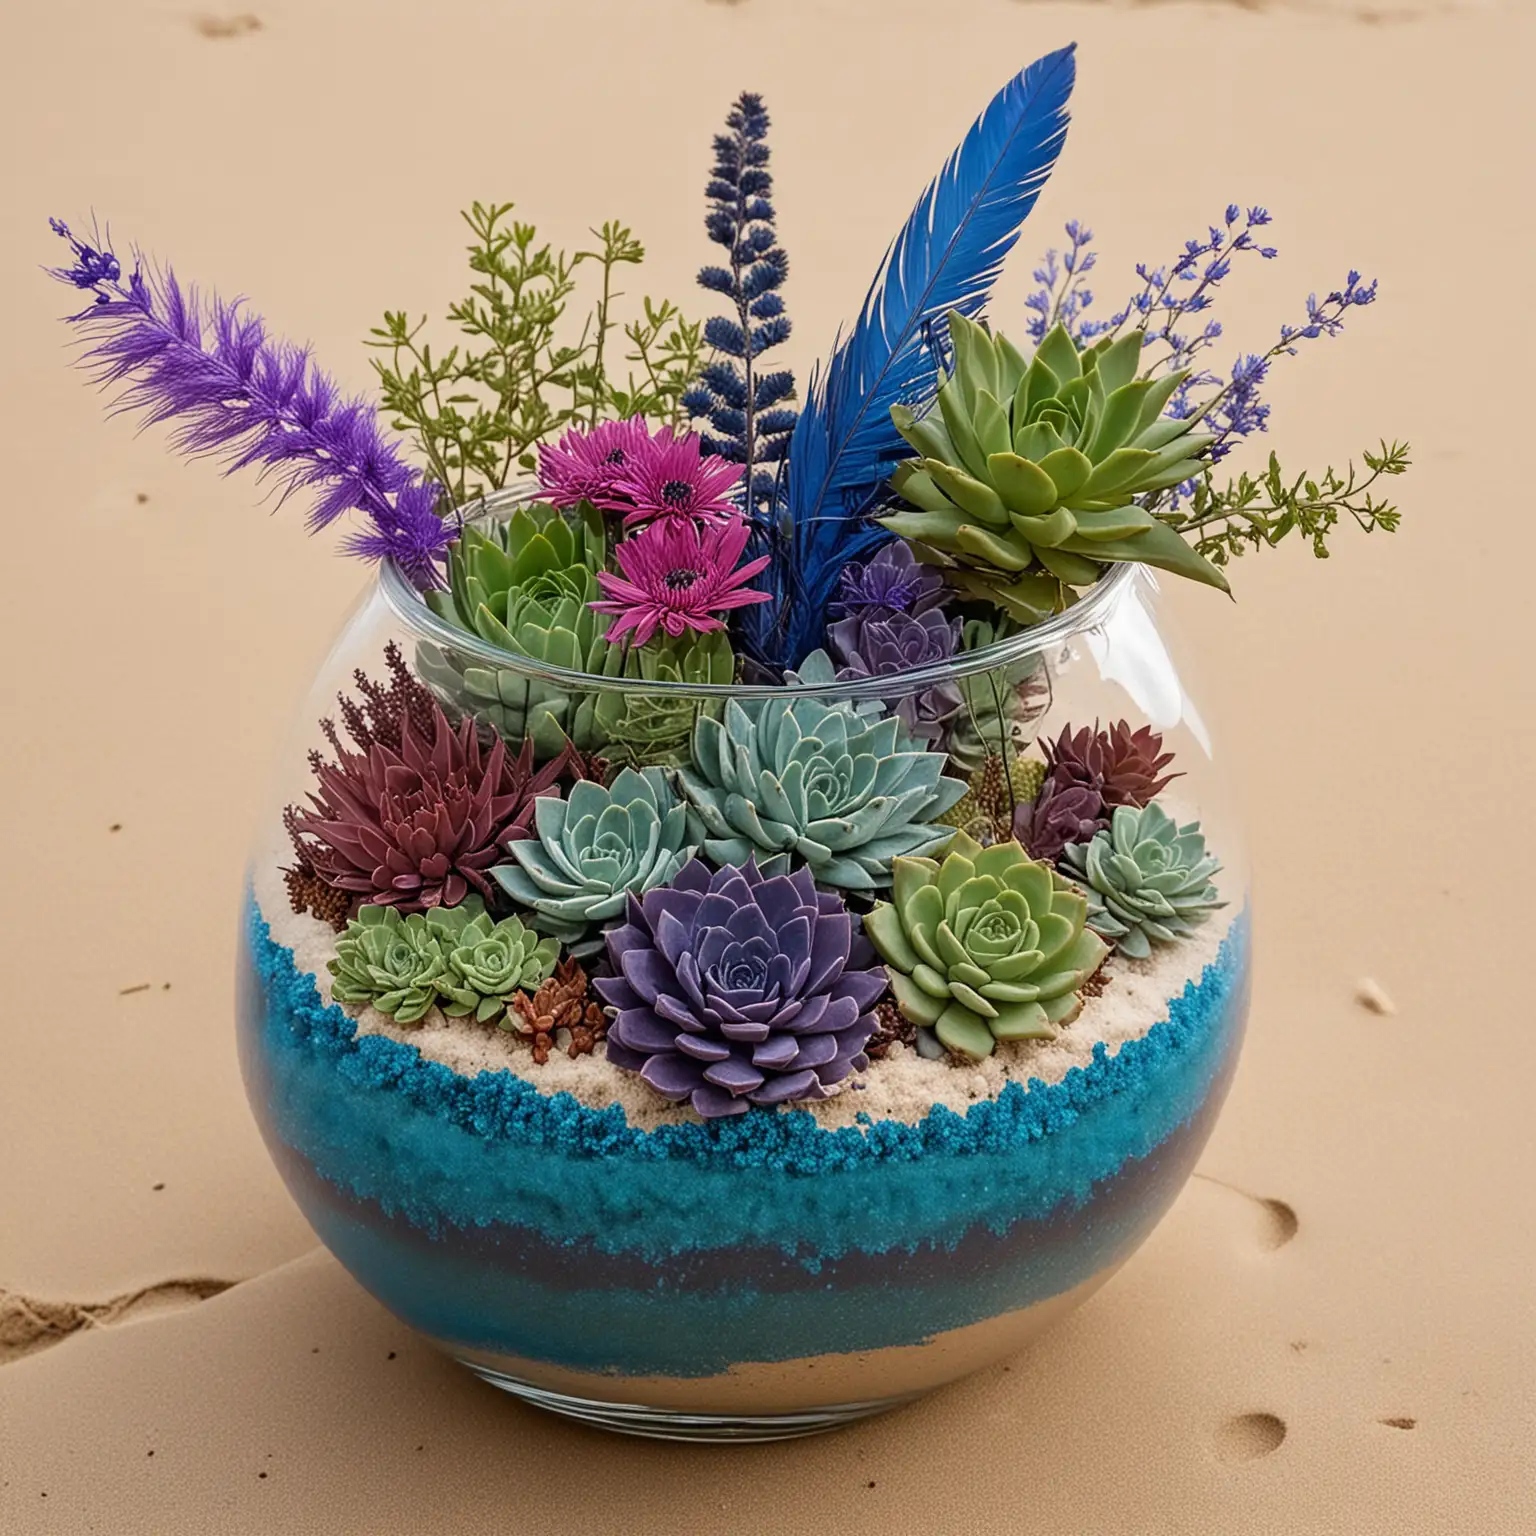 Colorful-Fringed-Fishbowl-Vase-with-Wildflower-Bouquet-and-Succulents